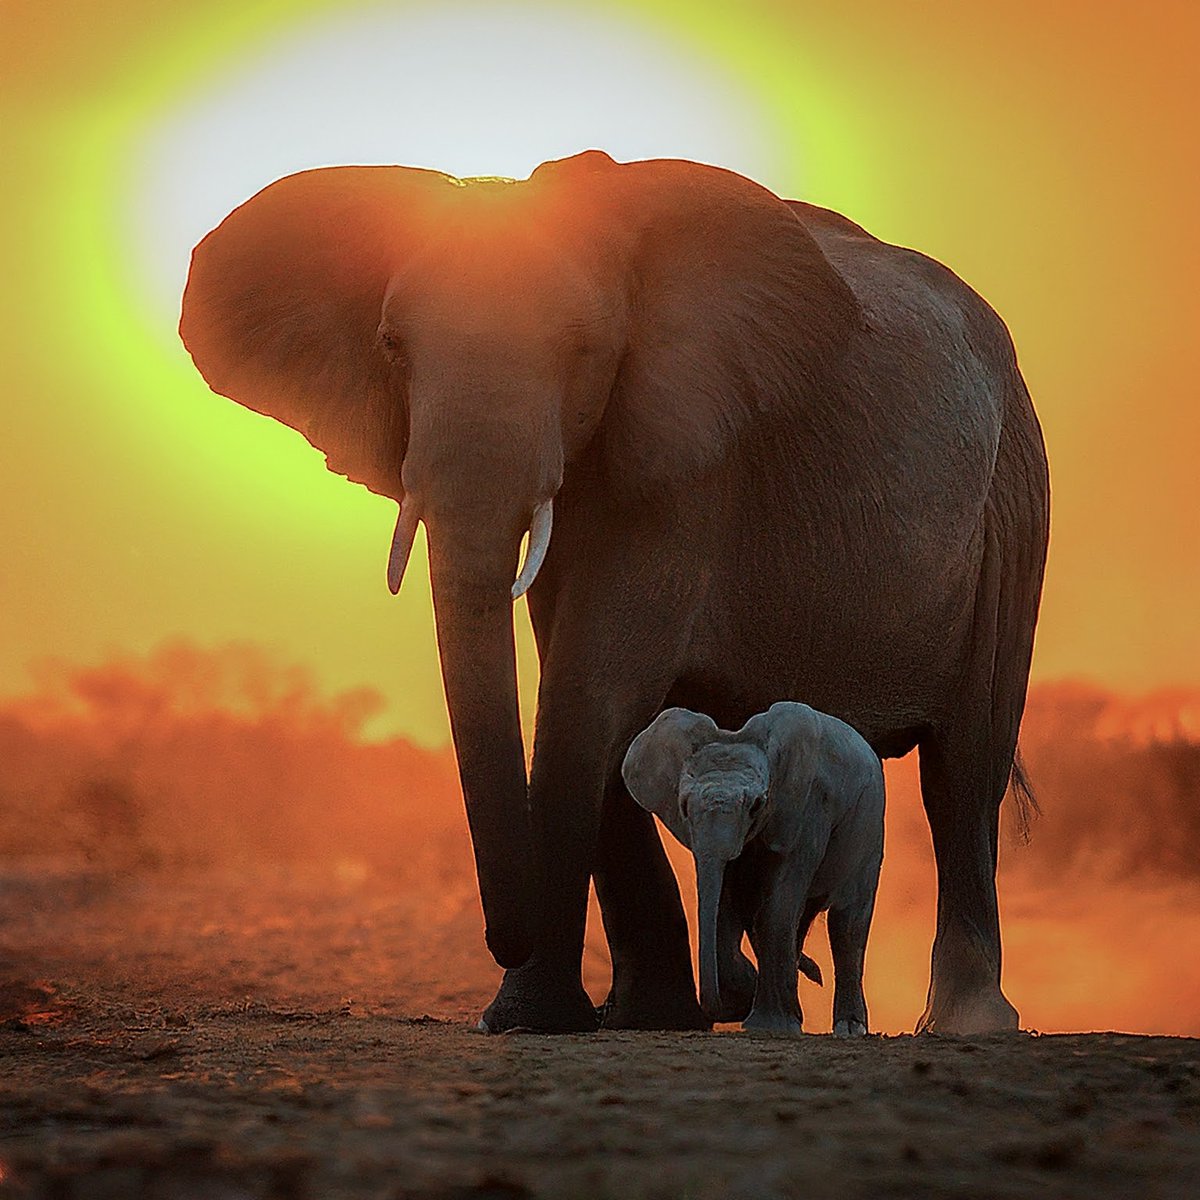 @HUAWEI_TECH4ALL #Tech4Nature A mother elephant tenderly bathing her calf in a tranquil river, capturing the joy & warmth of a real-life summer morning. The mother elephant sprays water on the calf with her trunk. The calf is enjoying the bath with her mother. Created using #GeminiAI